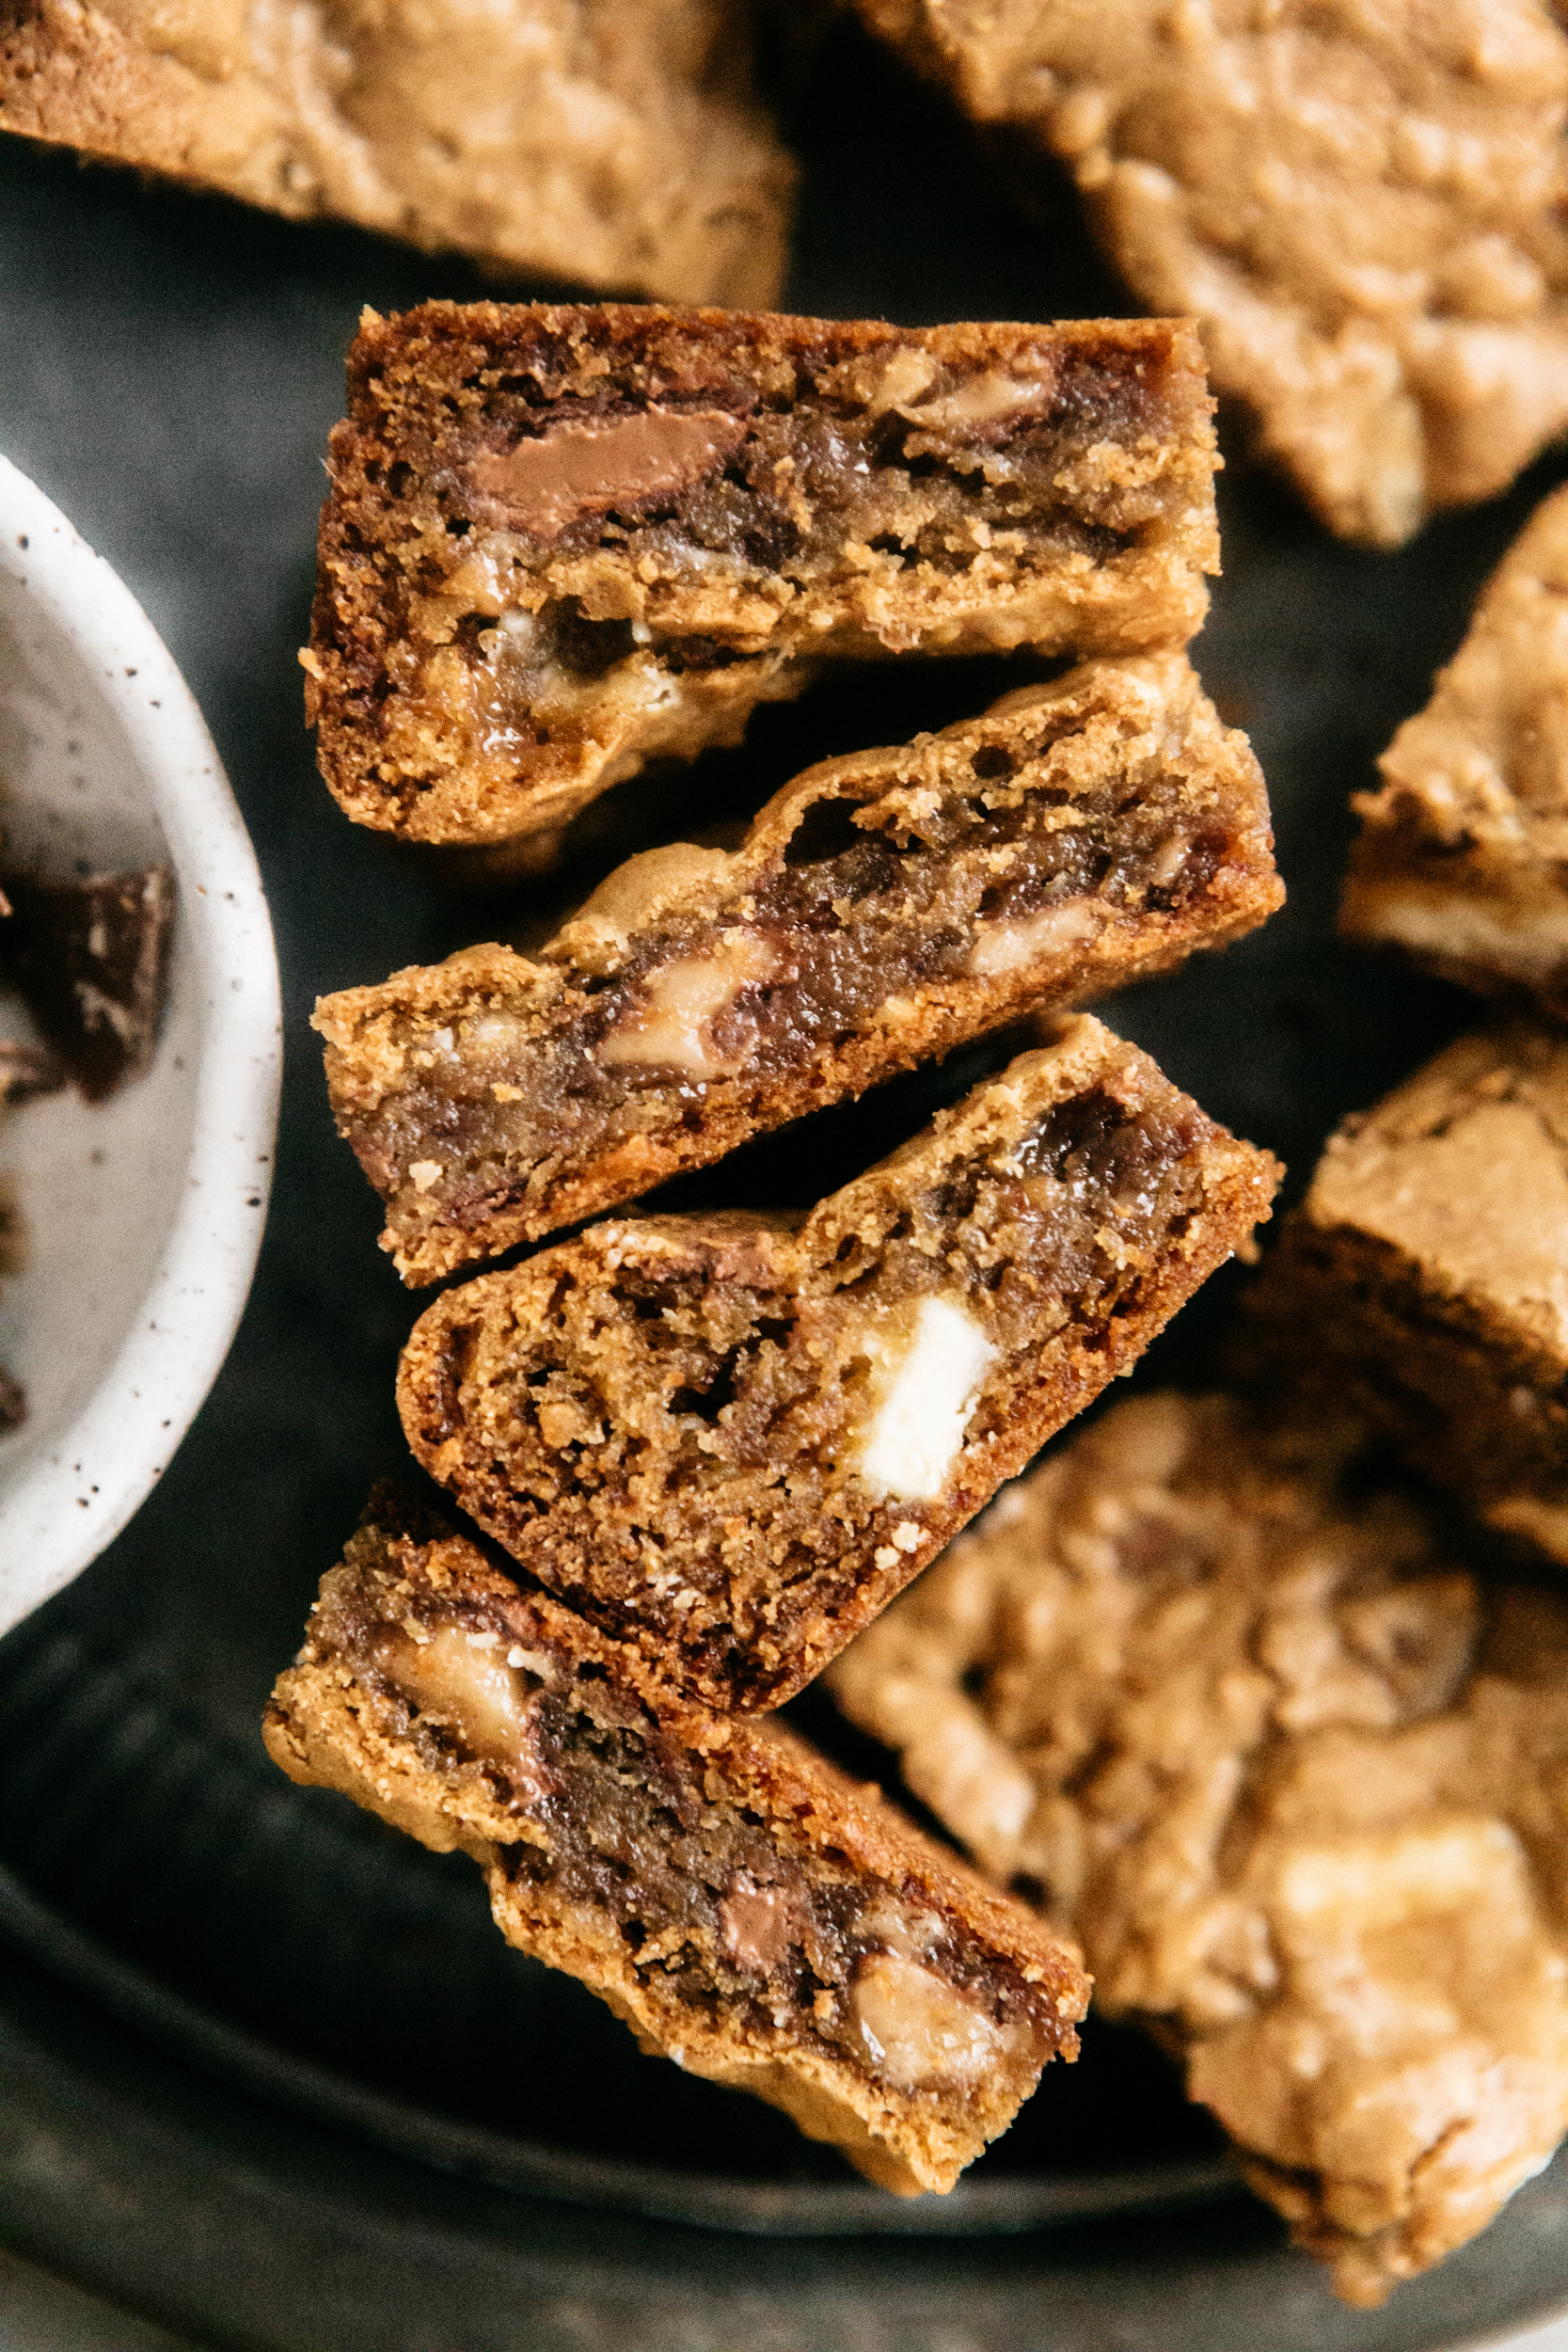 Toffee Cookie Bars - Heathers Home Bakery